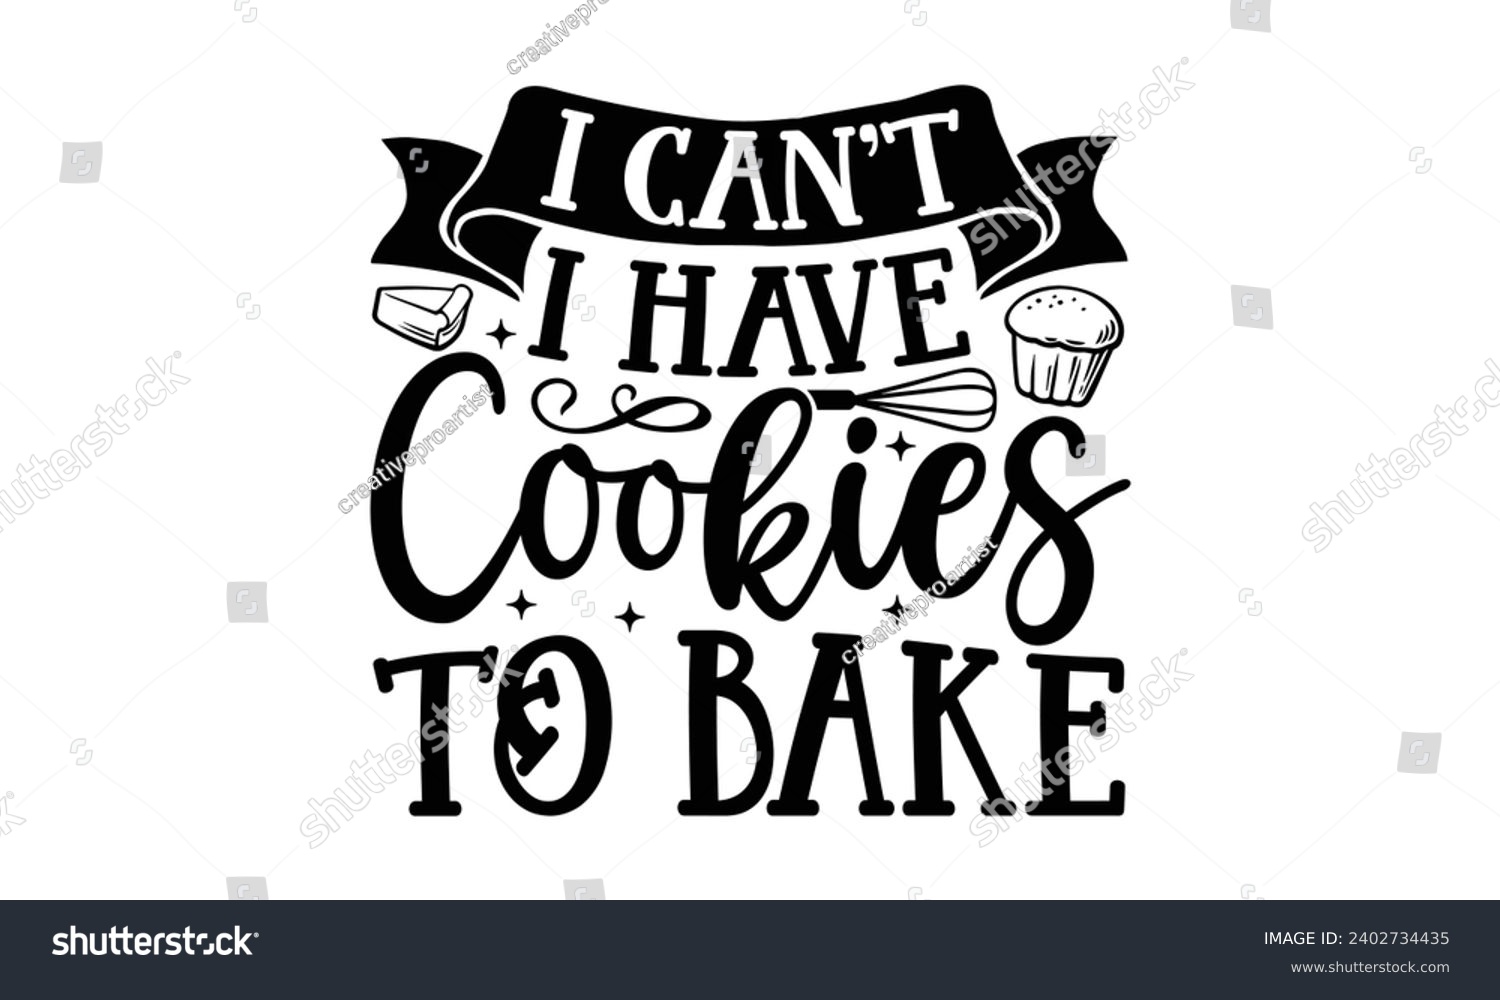 SVG of I Can’t I Have Cookies To Bake- Baking t- shirt design, This illustration can be used as a print on Template bags, stationary or as a poster, Isolated on white background. svg